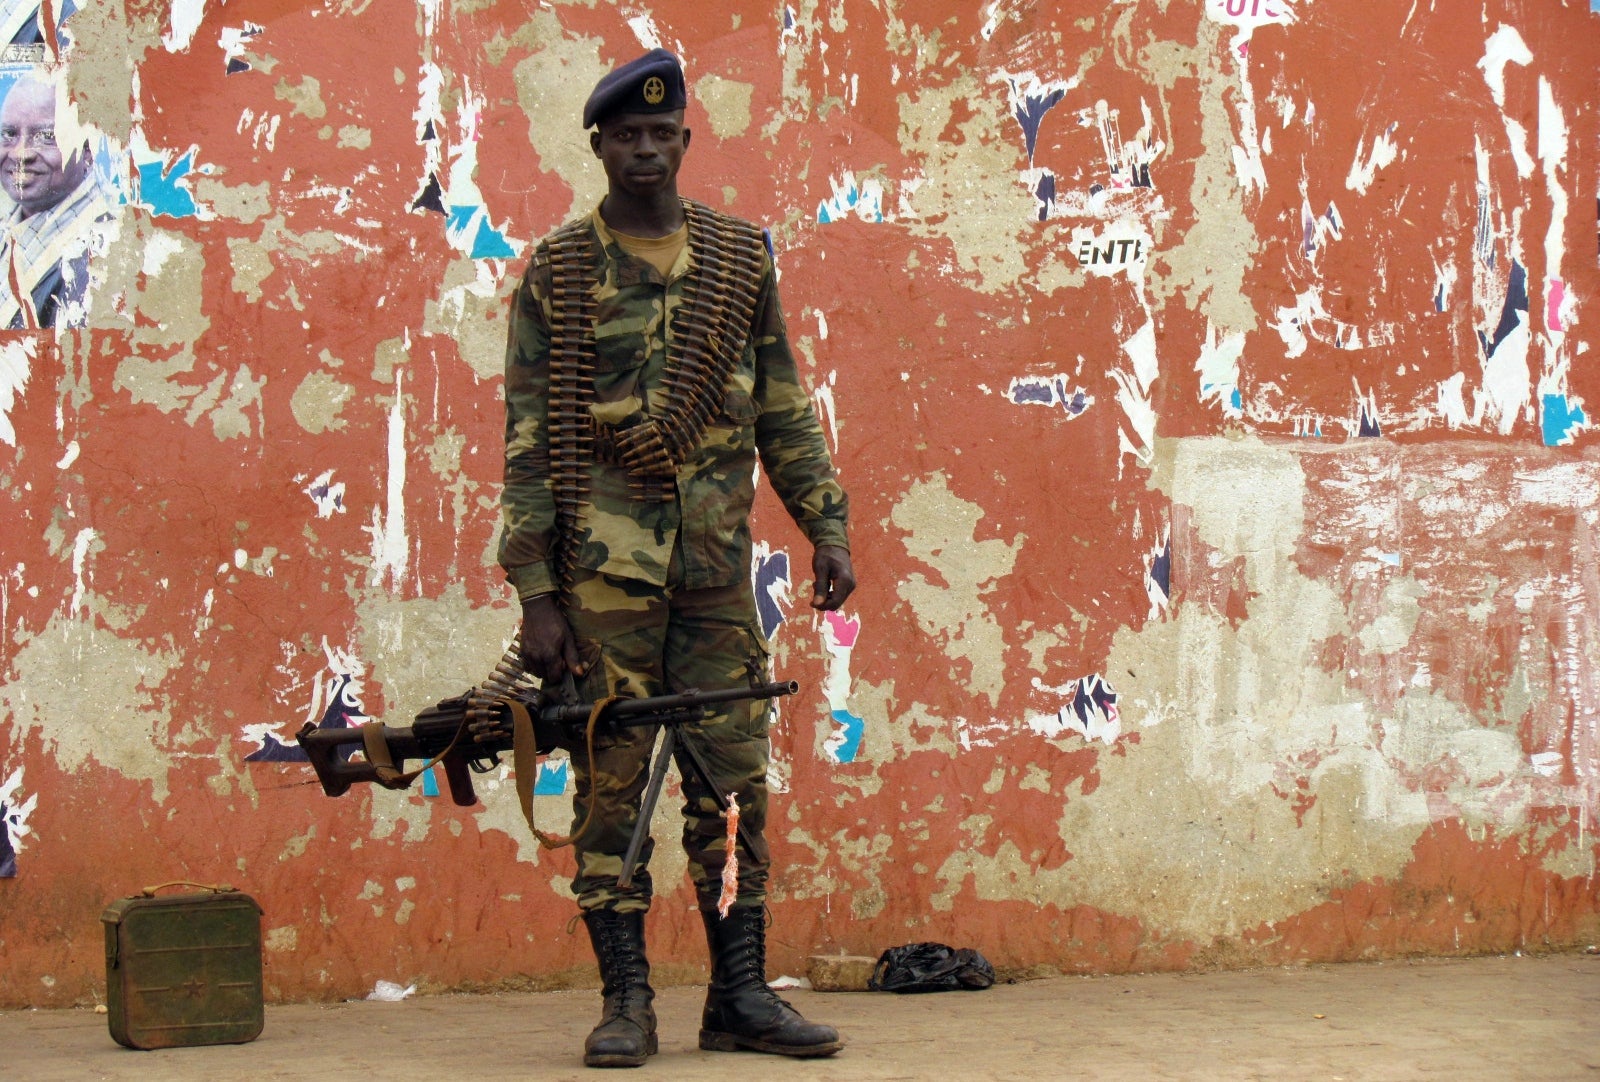 A soldier stands guard in a street near the Guinea-Bissau National Assembly in Bissau